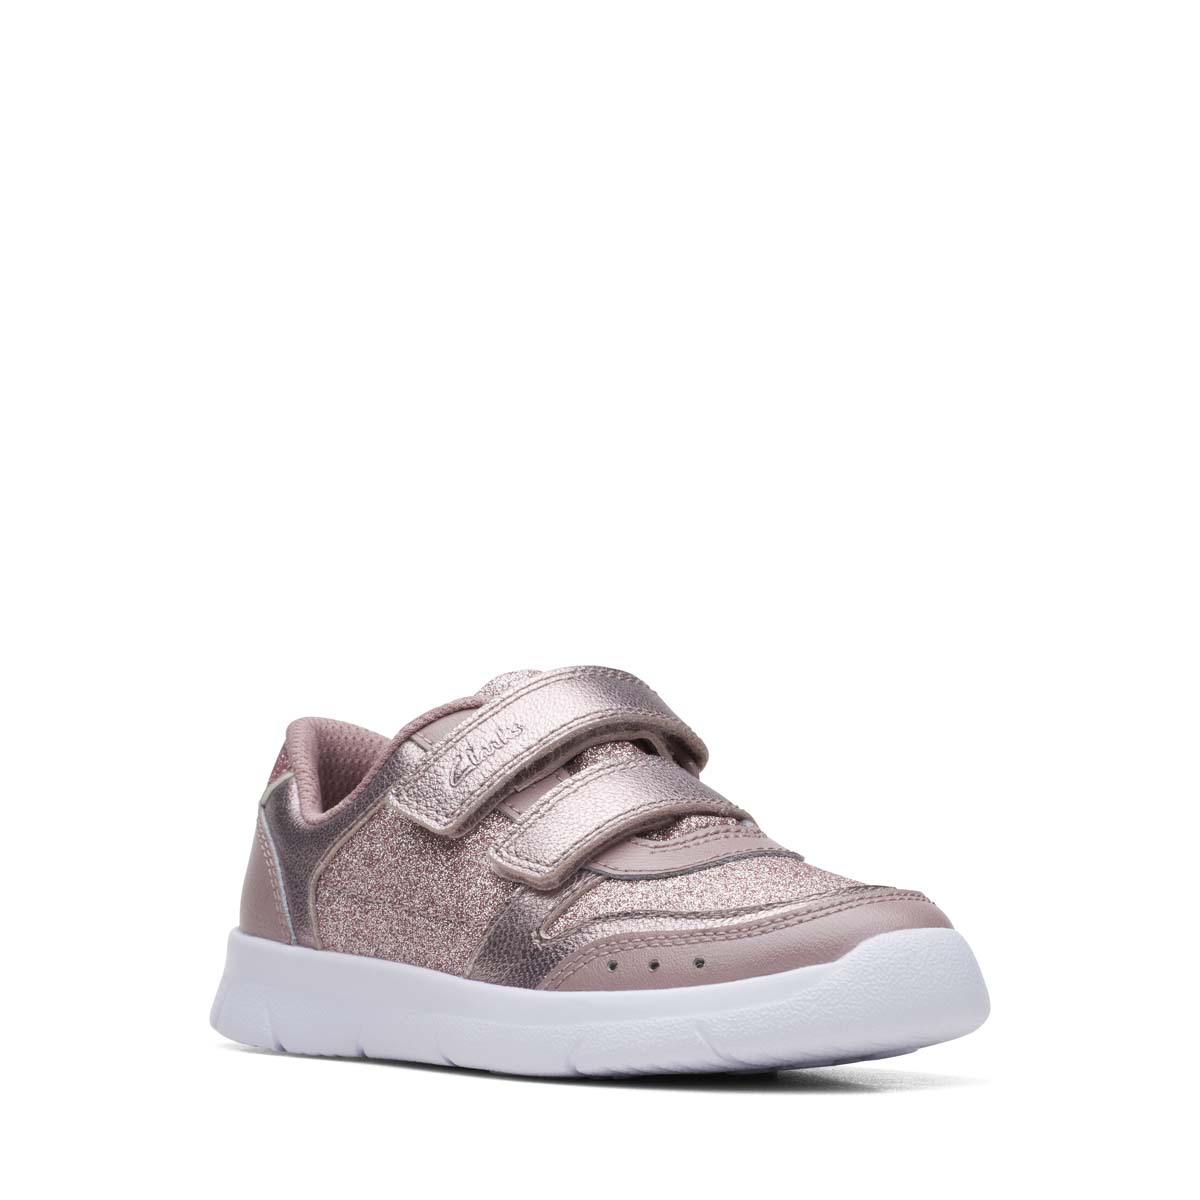 Clarks Ath Sonar K Pink Kids toddler girls trainers 6886-86F in a Plain Leather in Size 8.5